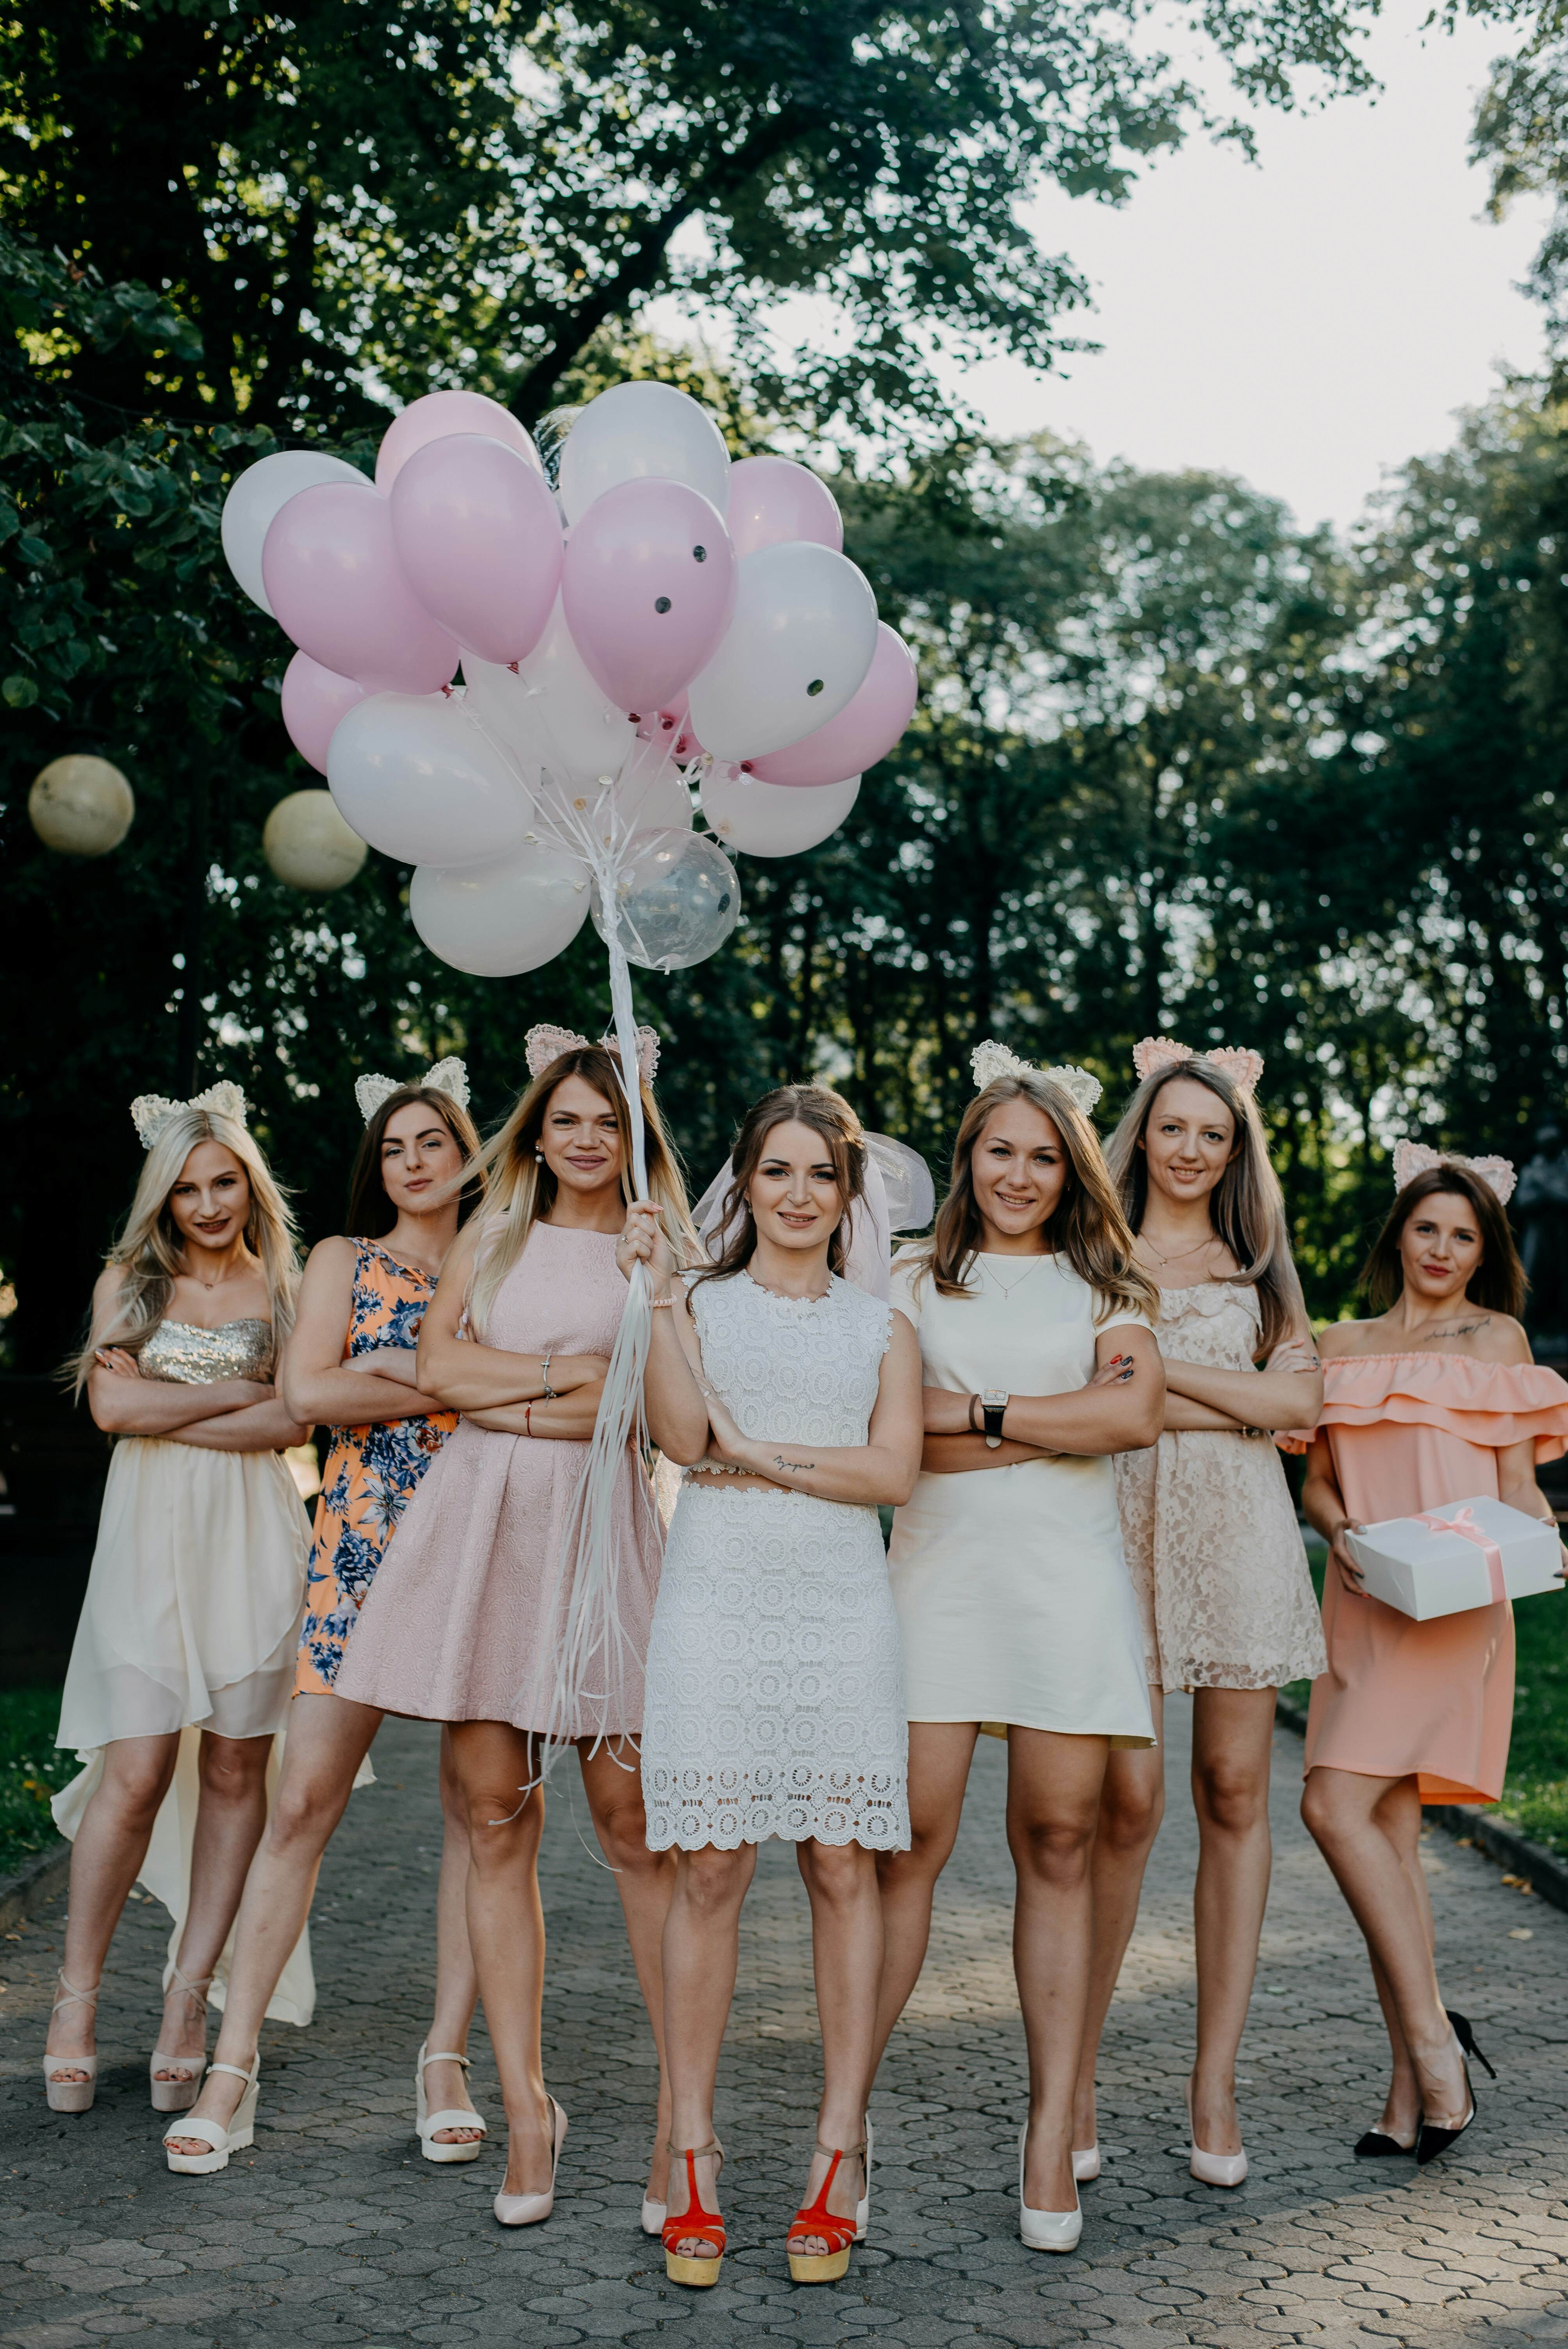 How To Host Perfect Bachelor's/Bachelorette For Your Friends 